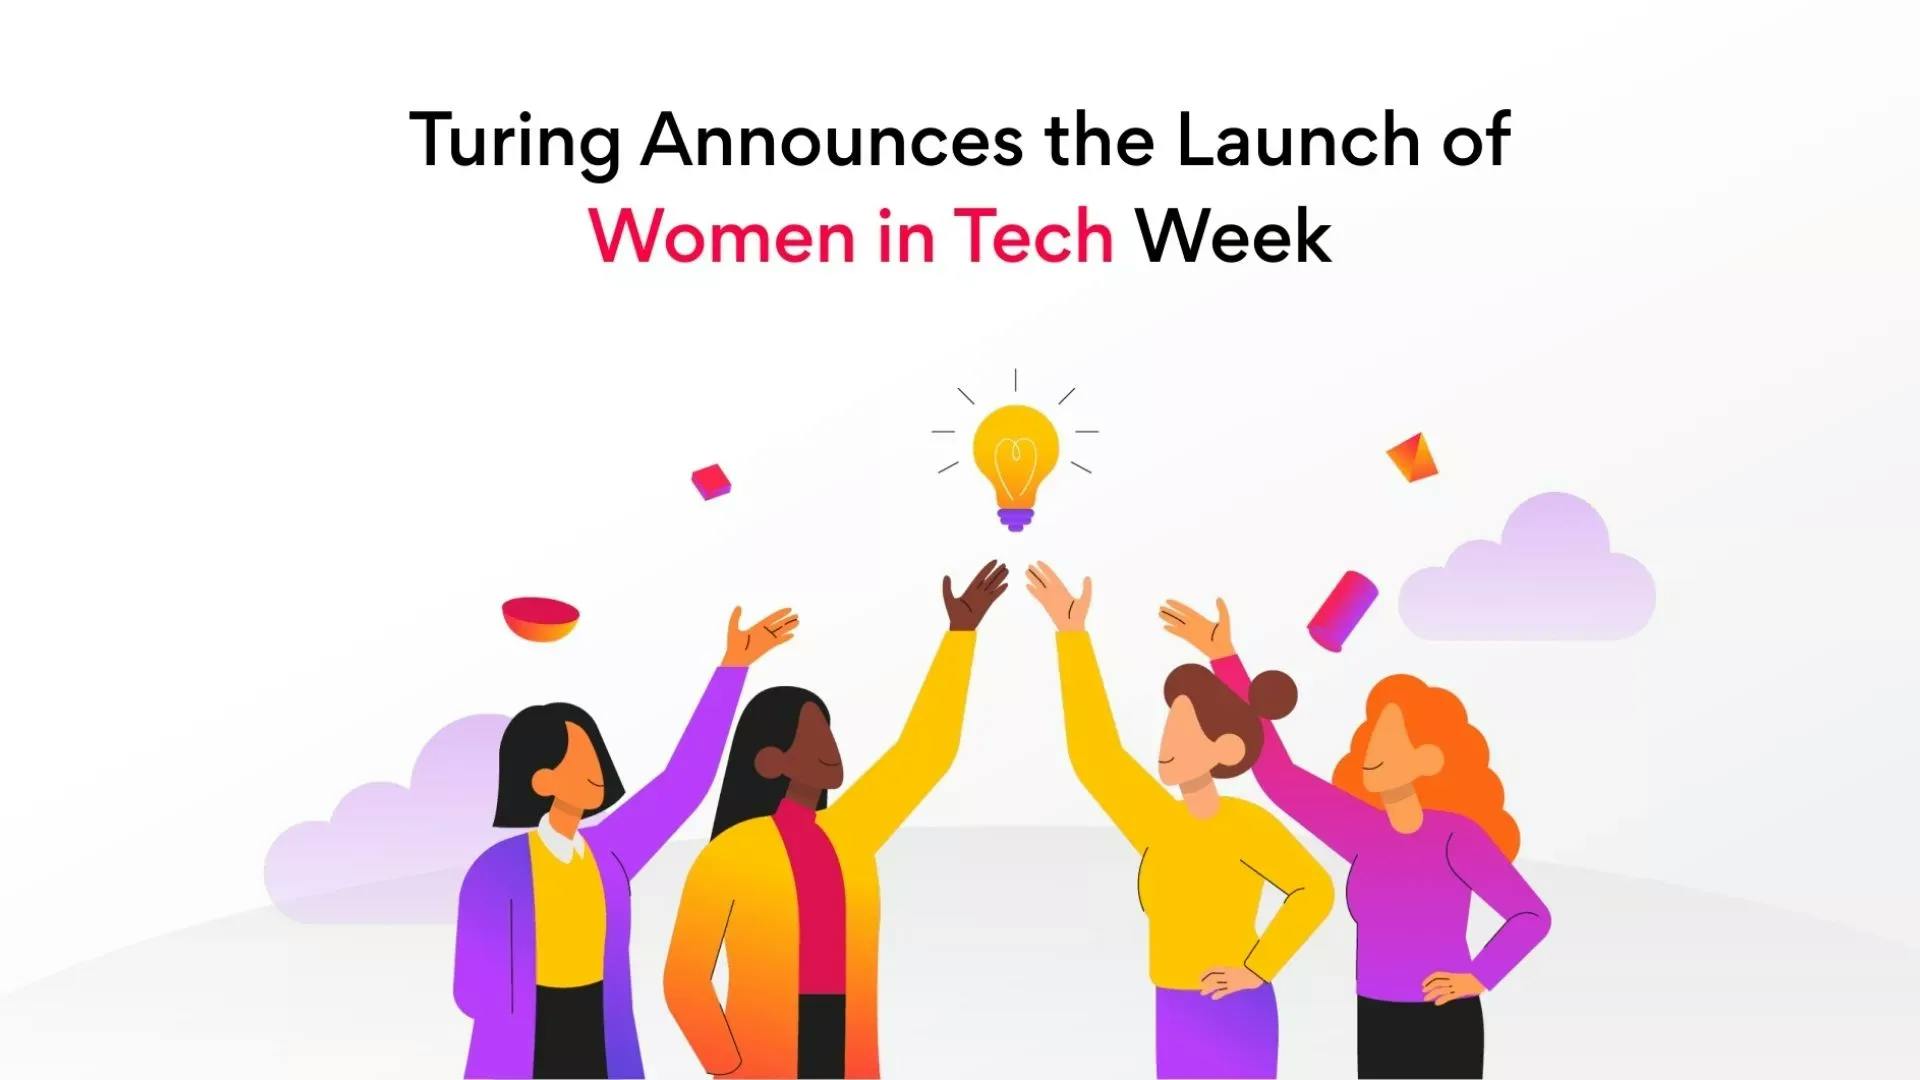 Turing Announces the Launch of Women in Tech Week